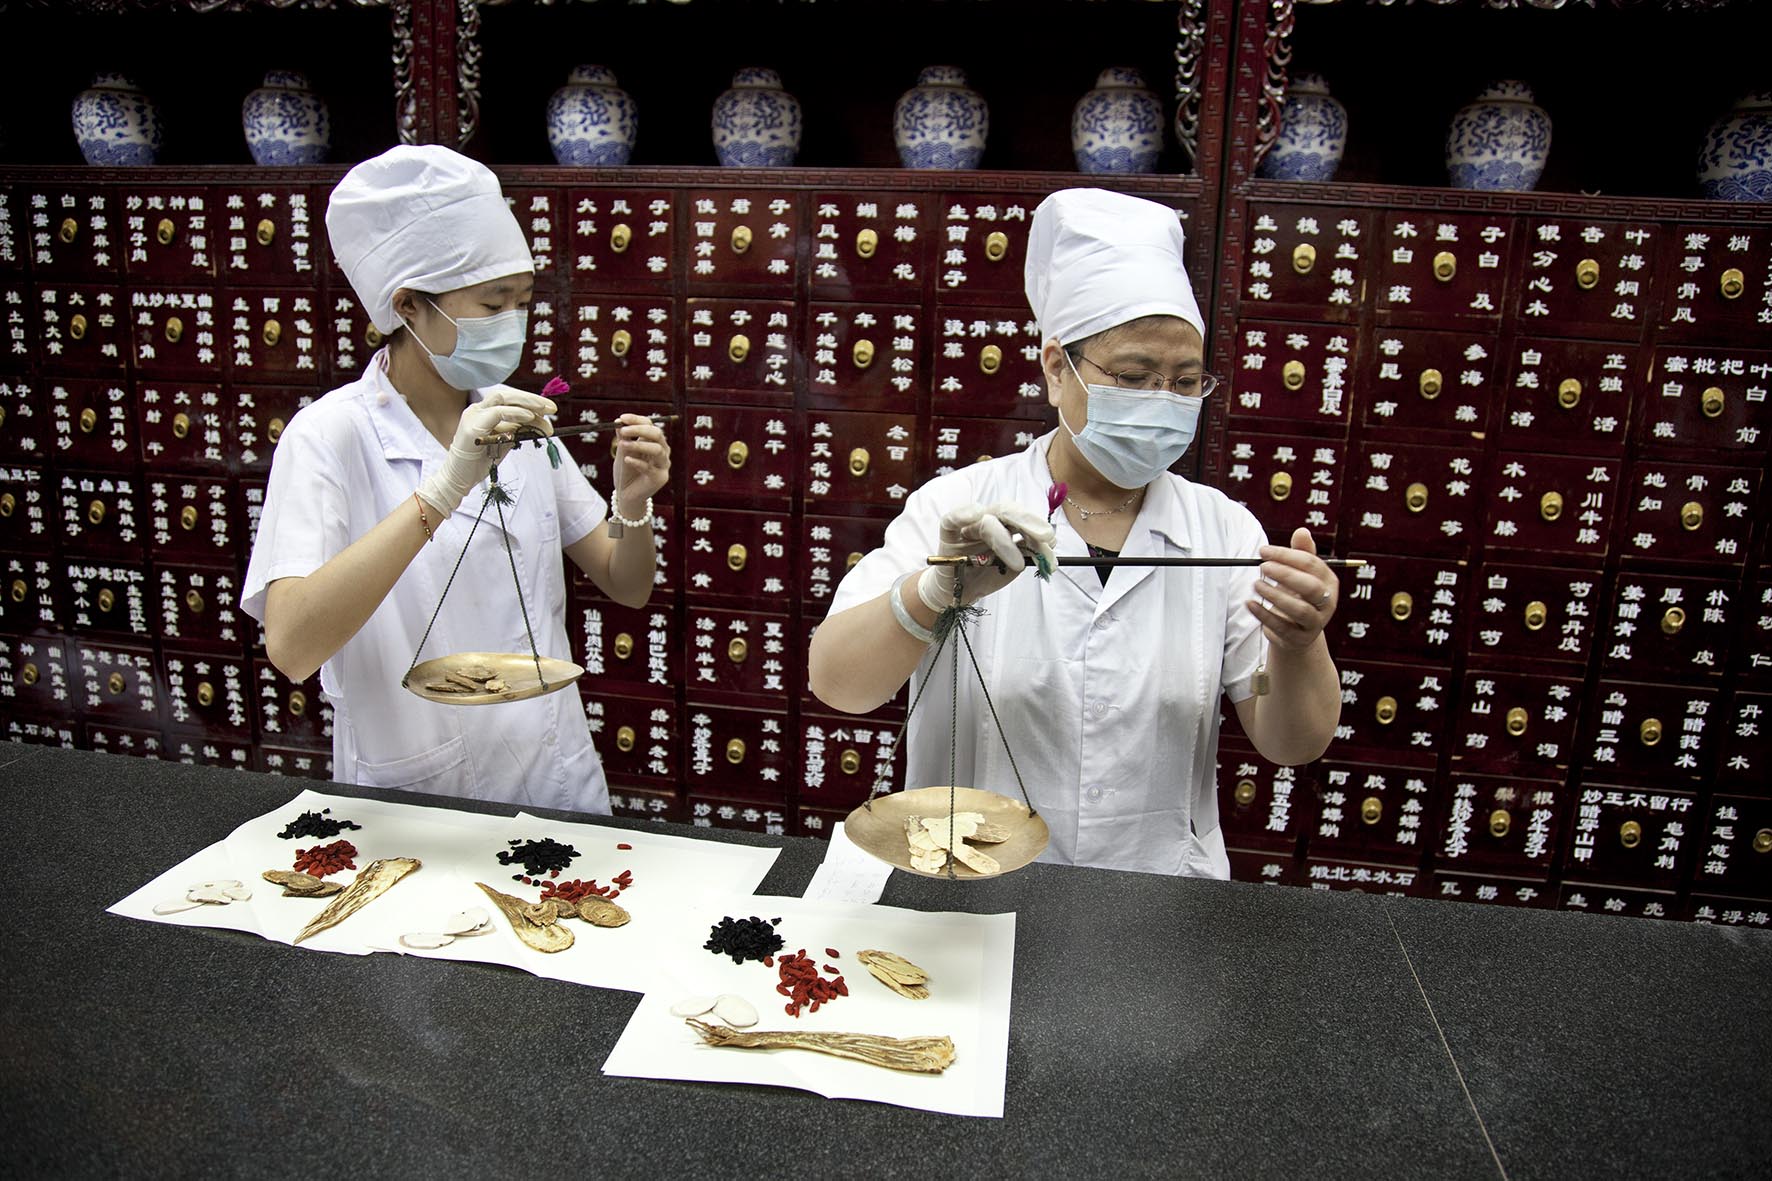  Preparation of traditional Chinese medicine at the Beijing Tongrentang drug store. 